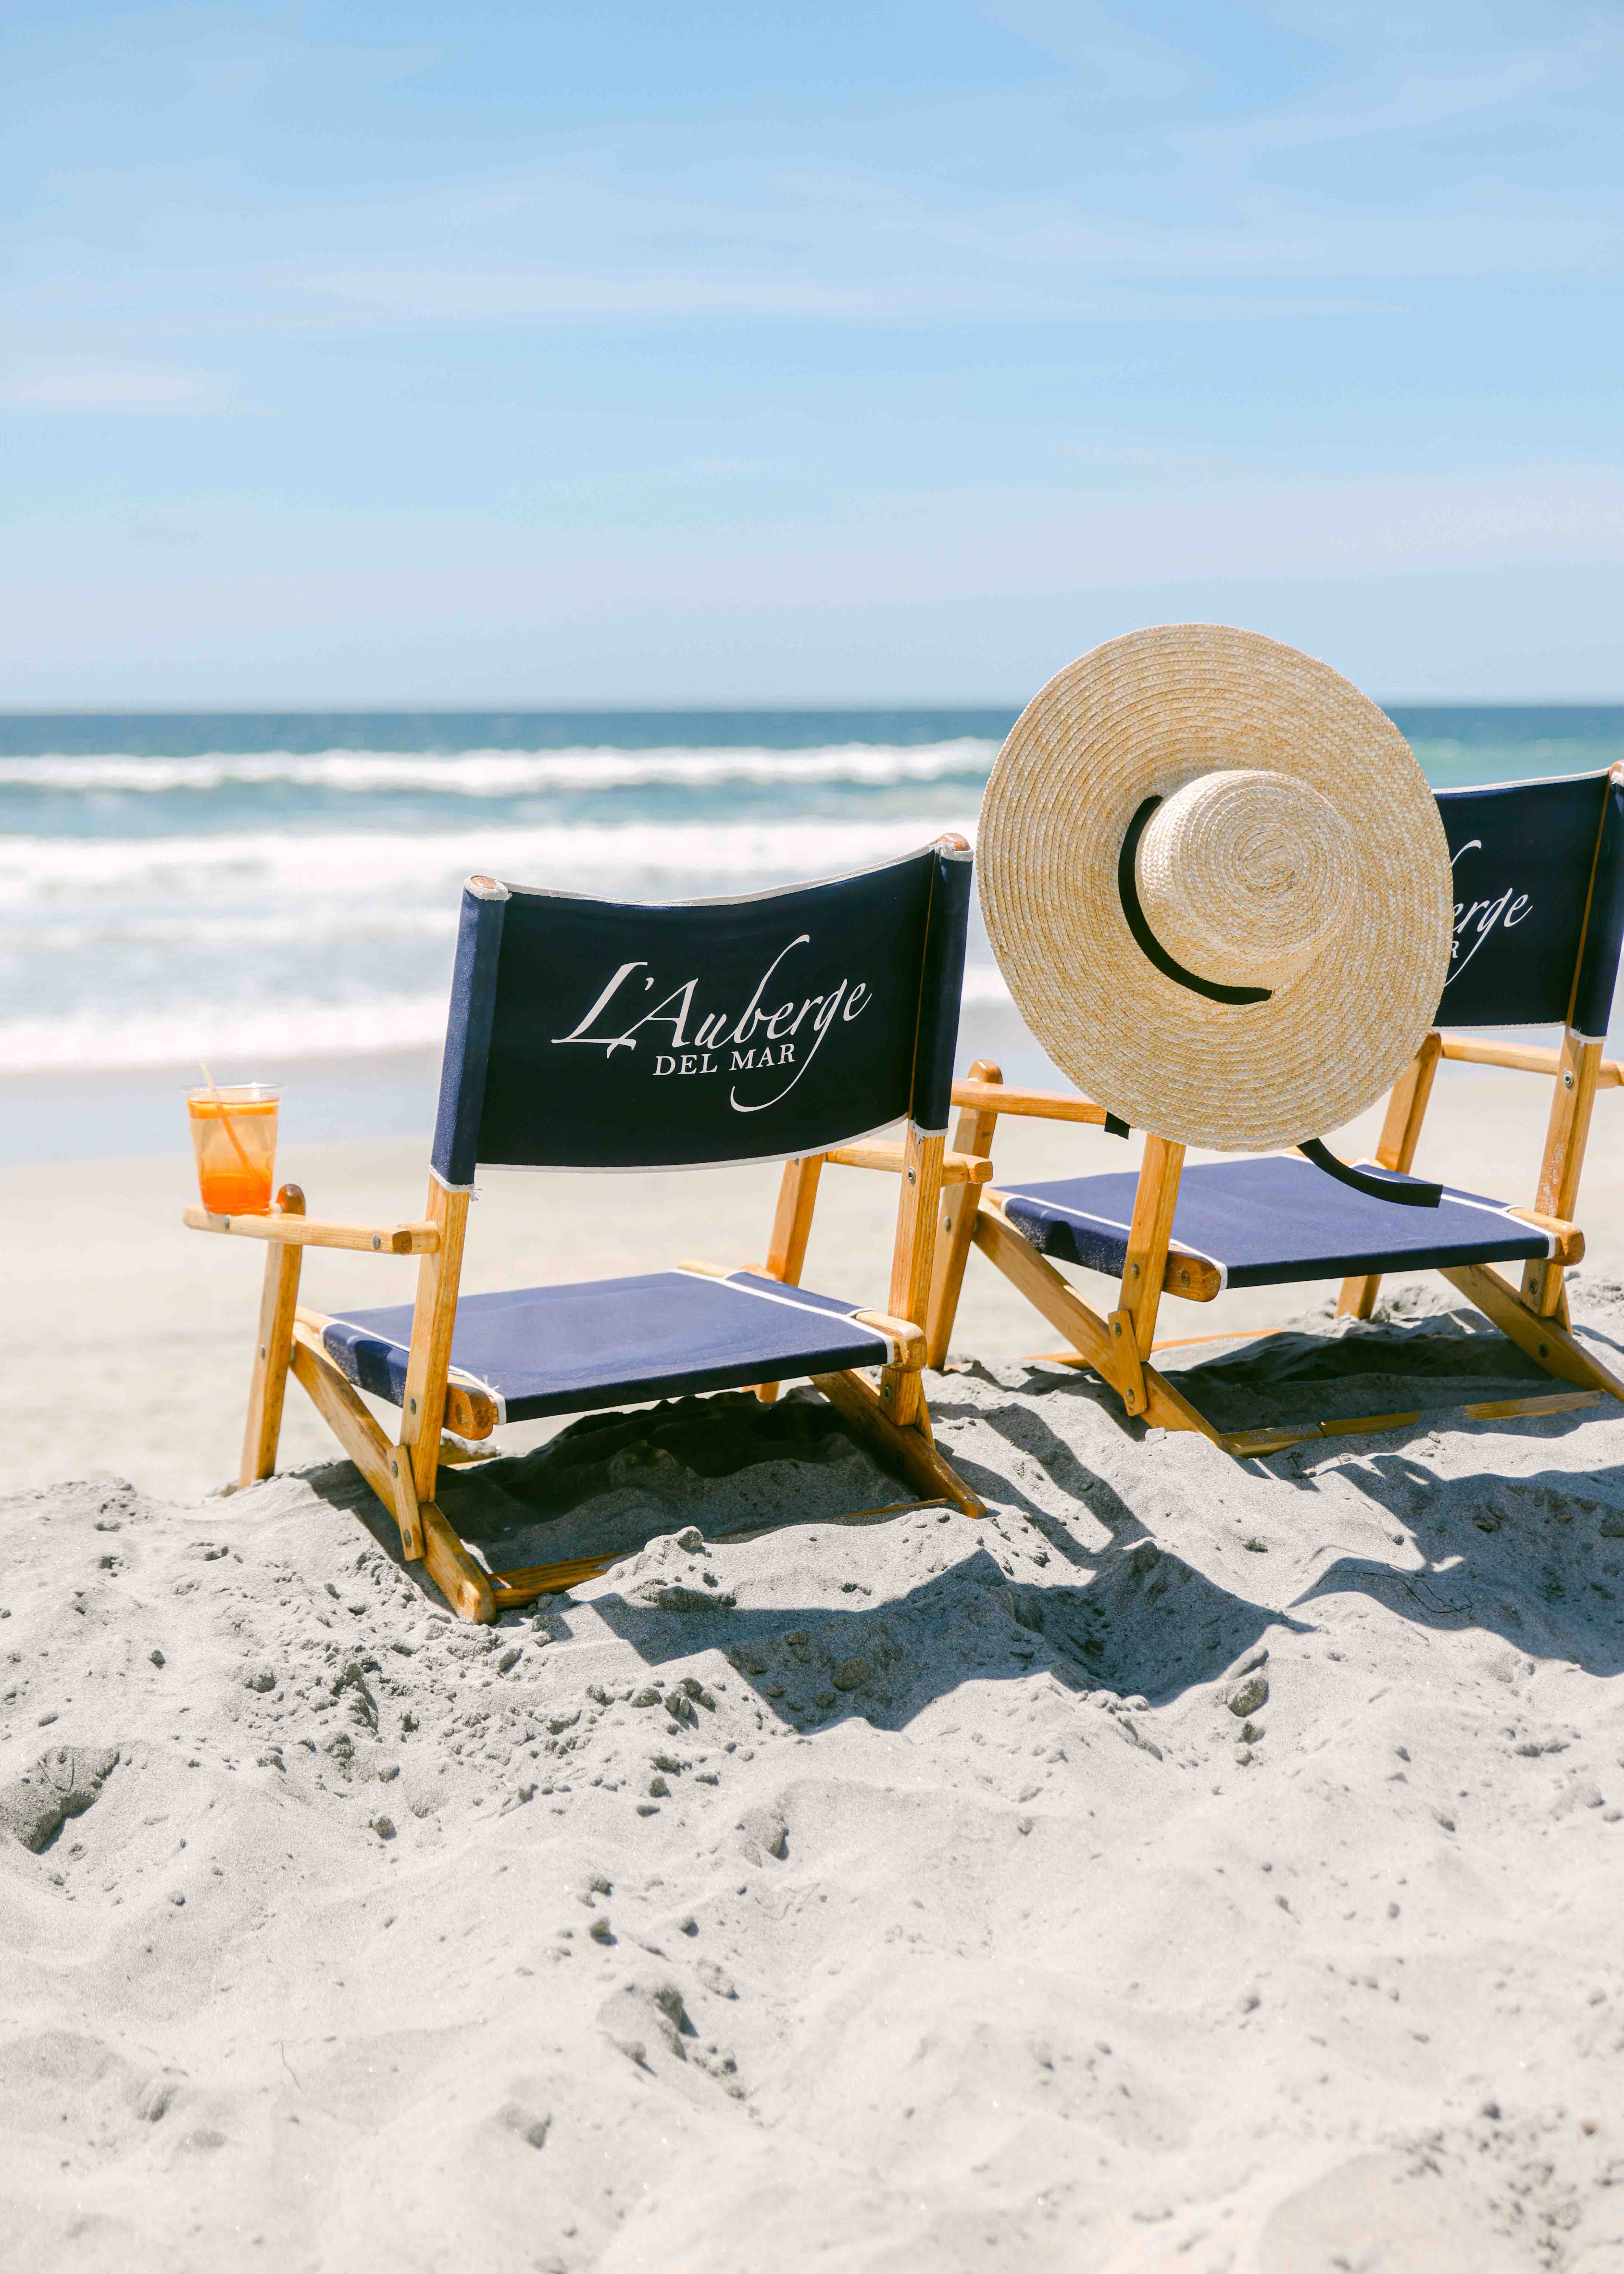 Chelsea Loren Southern california photographer for boutique hotel l'auberge del mar with beach chairs on the sand with aperol spritz and large french straw beach hat. Luxury hotel experience photographer.